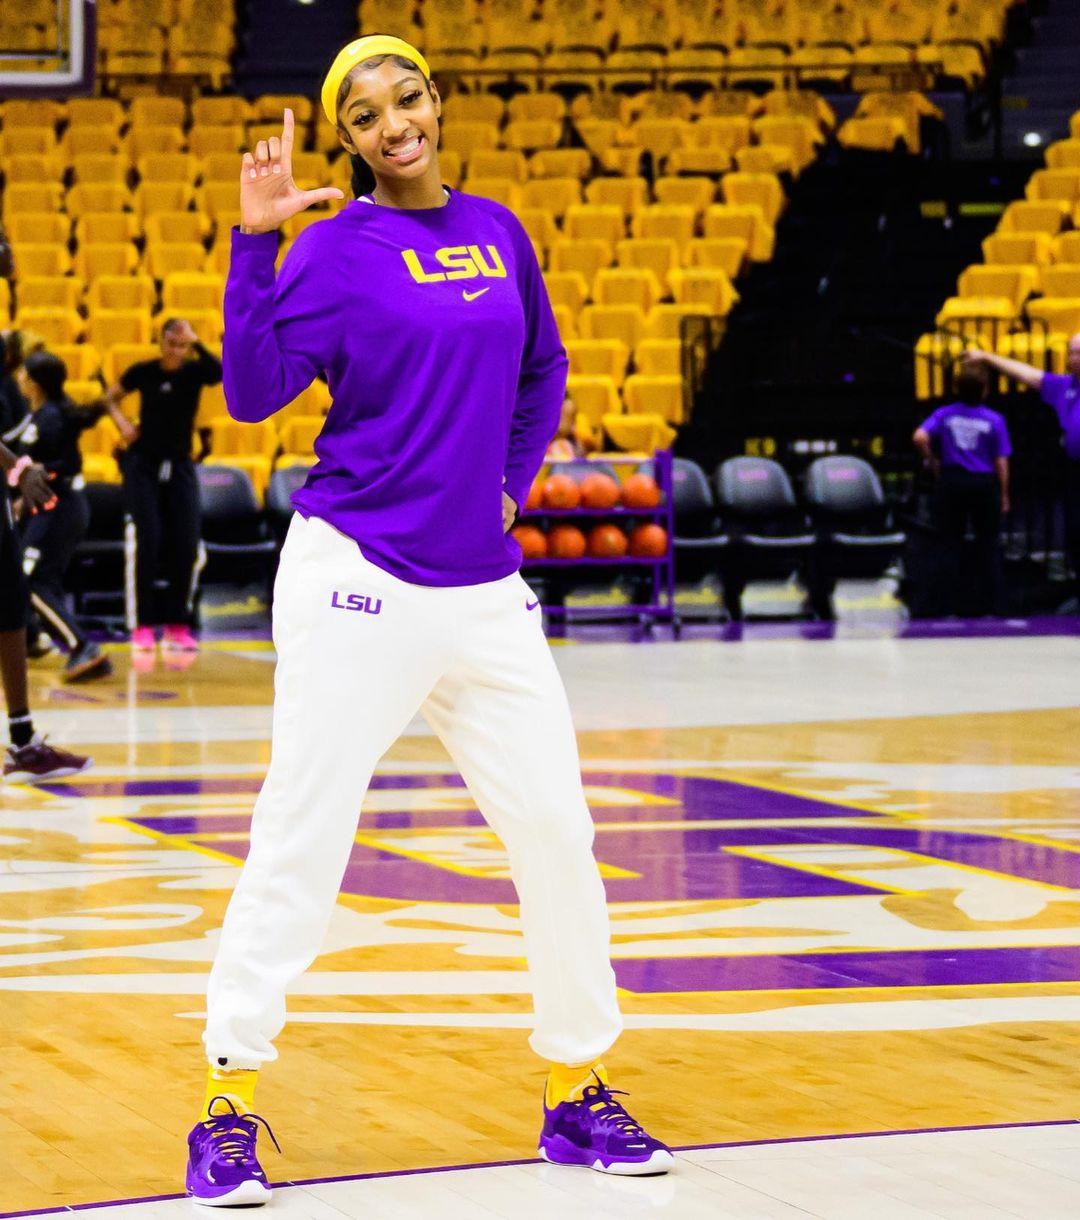 LSU's Angel Reese Explains Why She Wears One Legging - Sports Illustrated